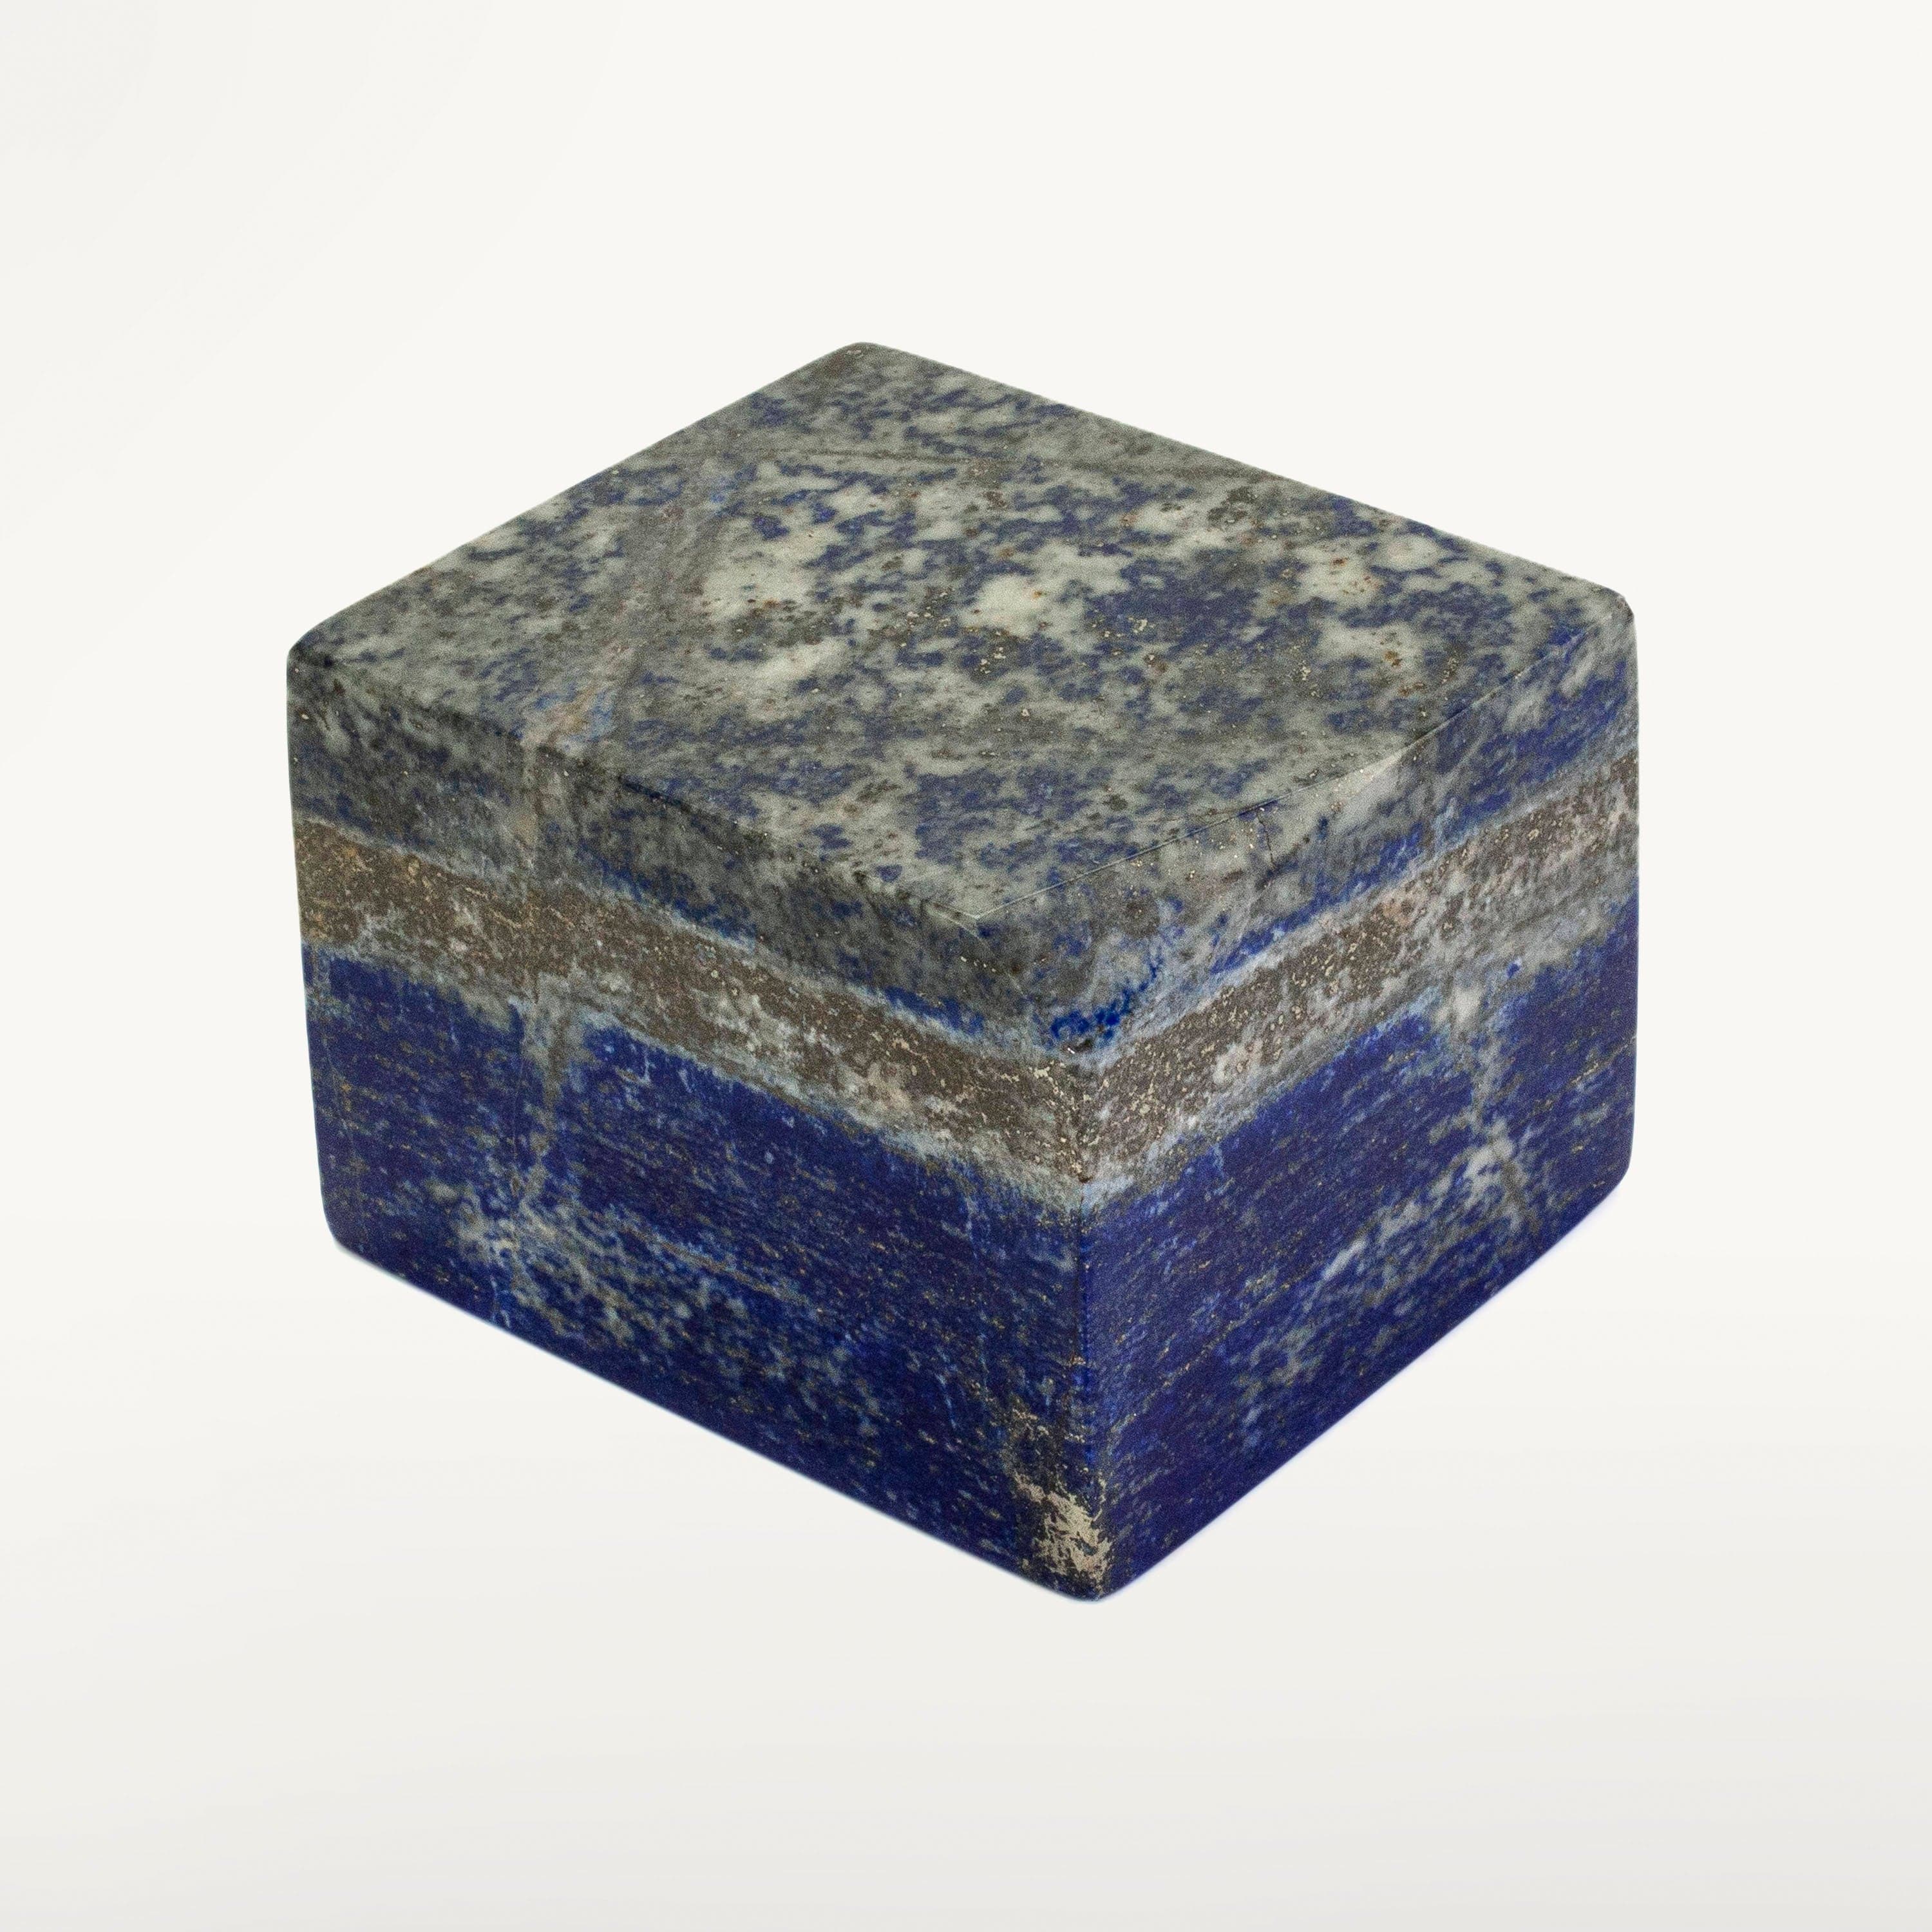 Kalifano Lapis Lapis Lazuil Cube from Afghanistan - 655 g / 1.4 lbs LP700.006